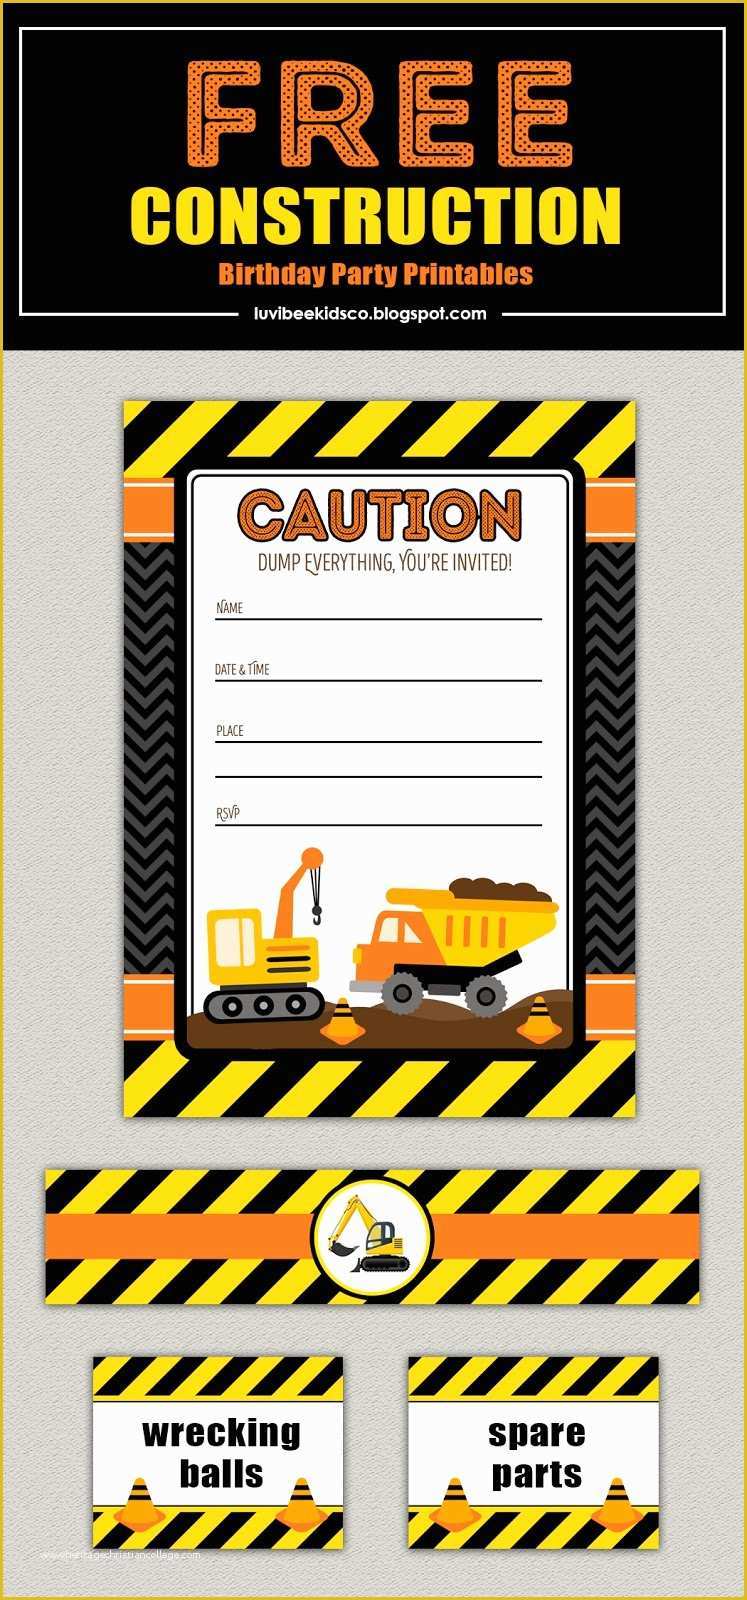 Free Construction Sign Templates Of Free Construction Birthday Party Printables